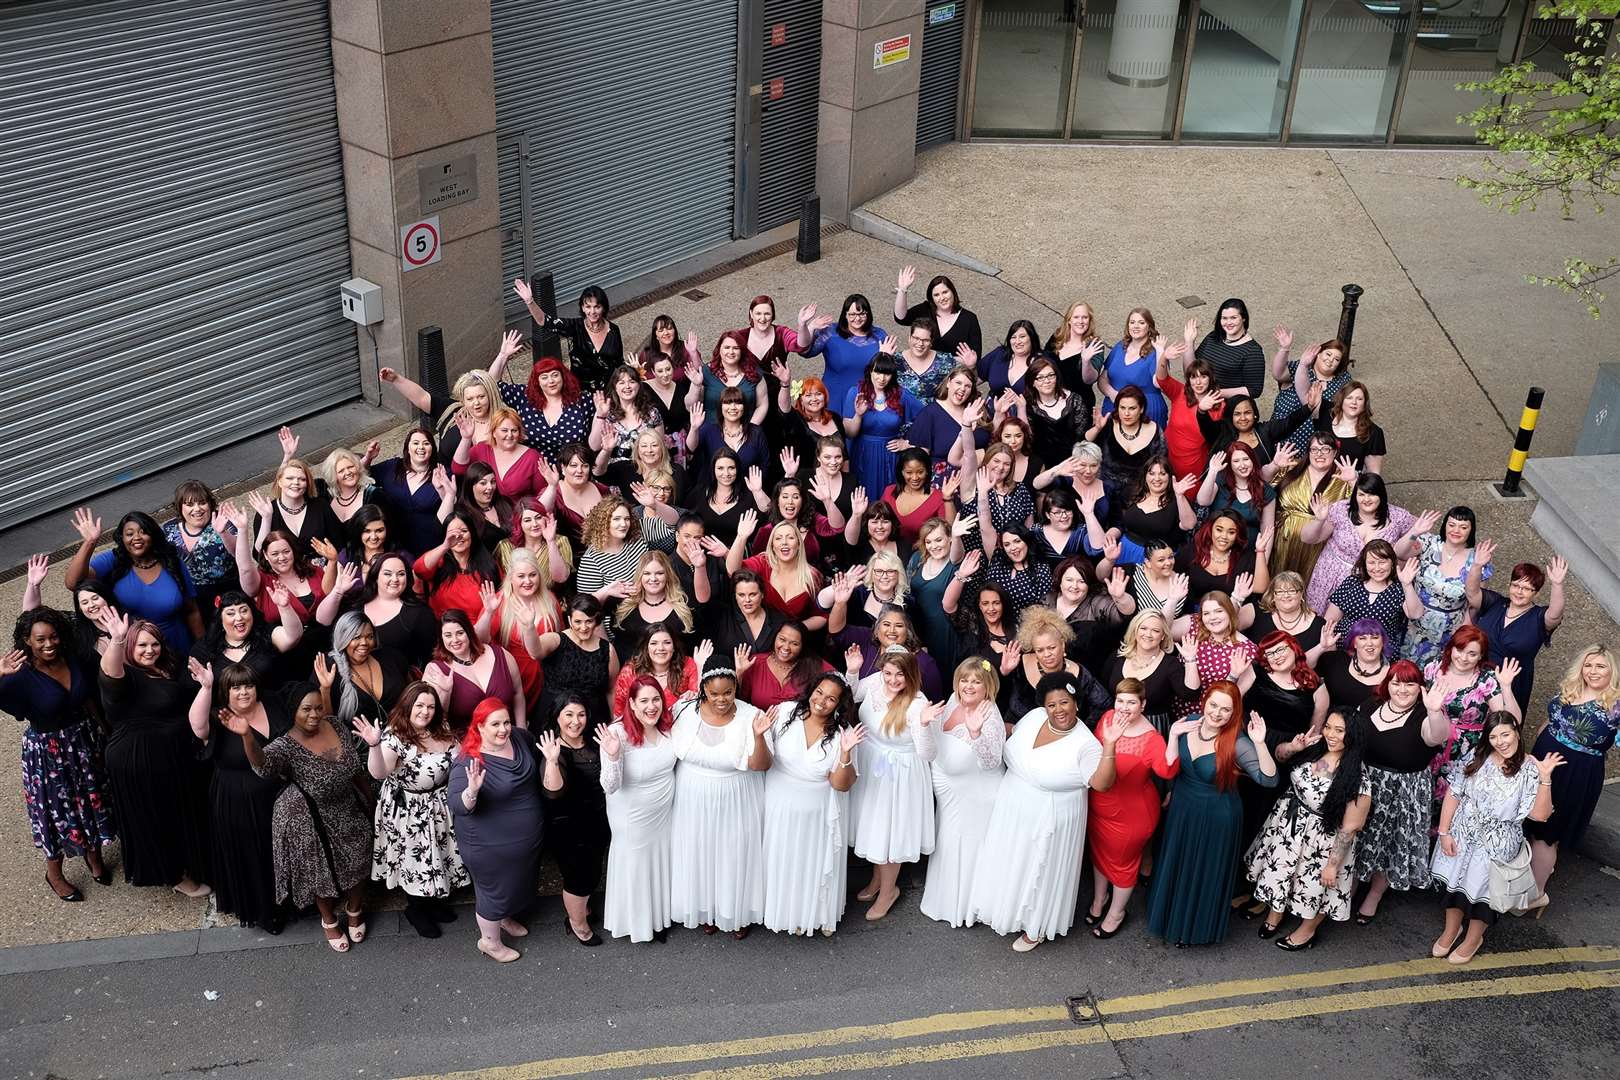 Photo shoot with 100 women in London